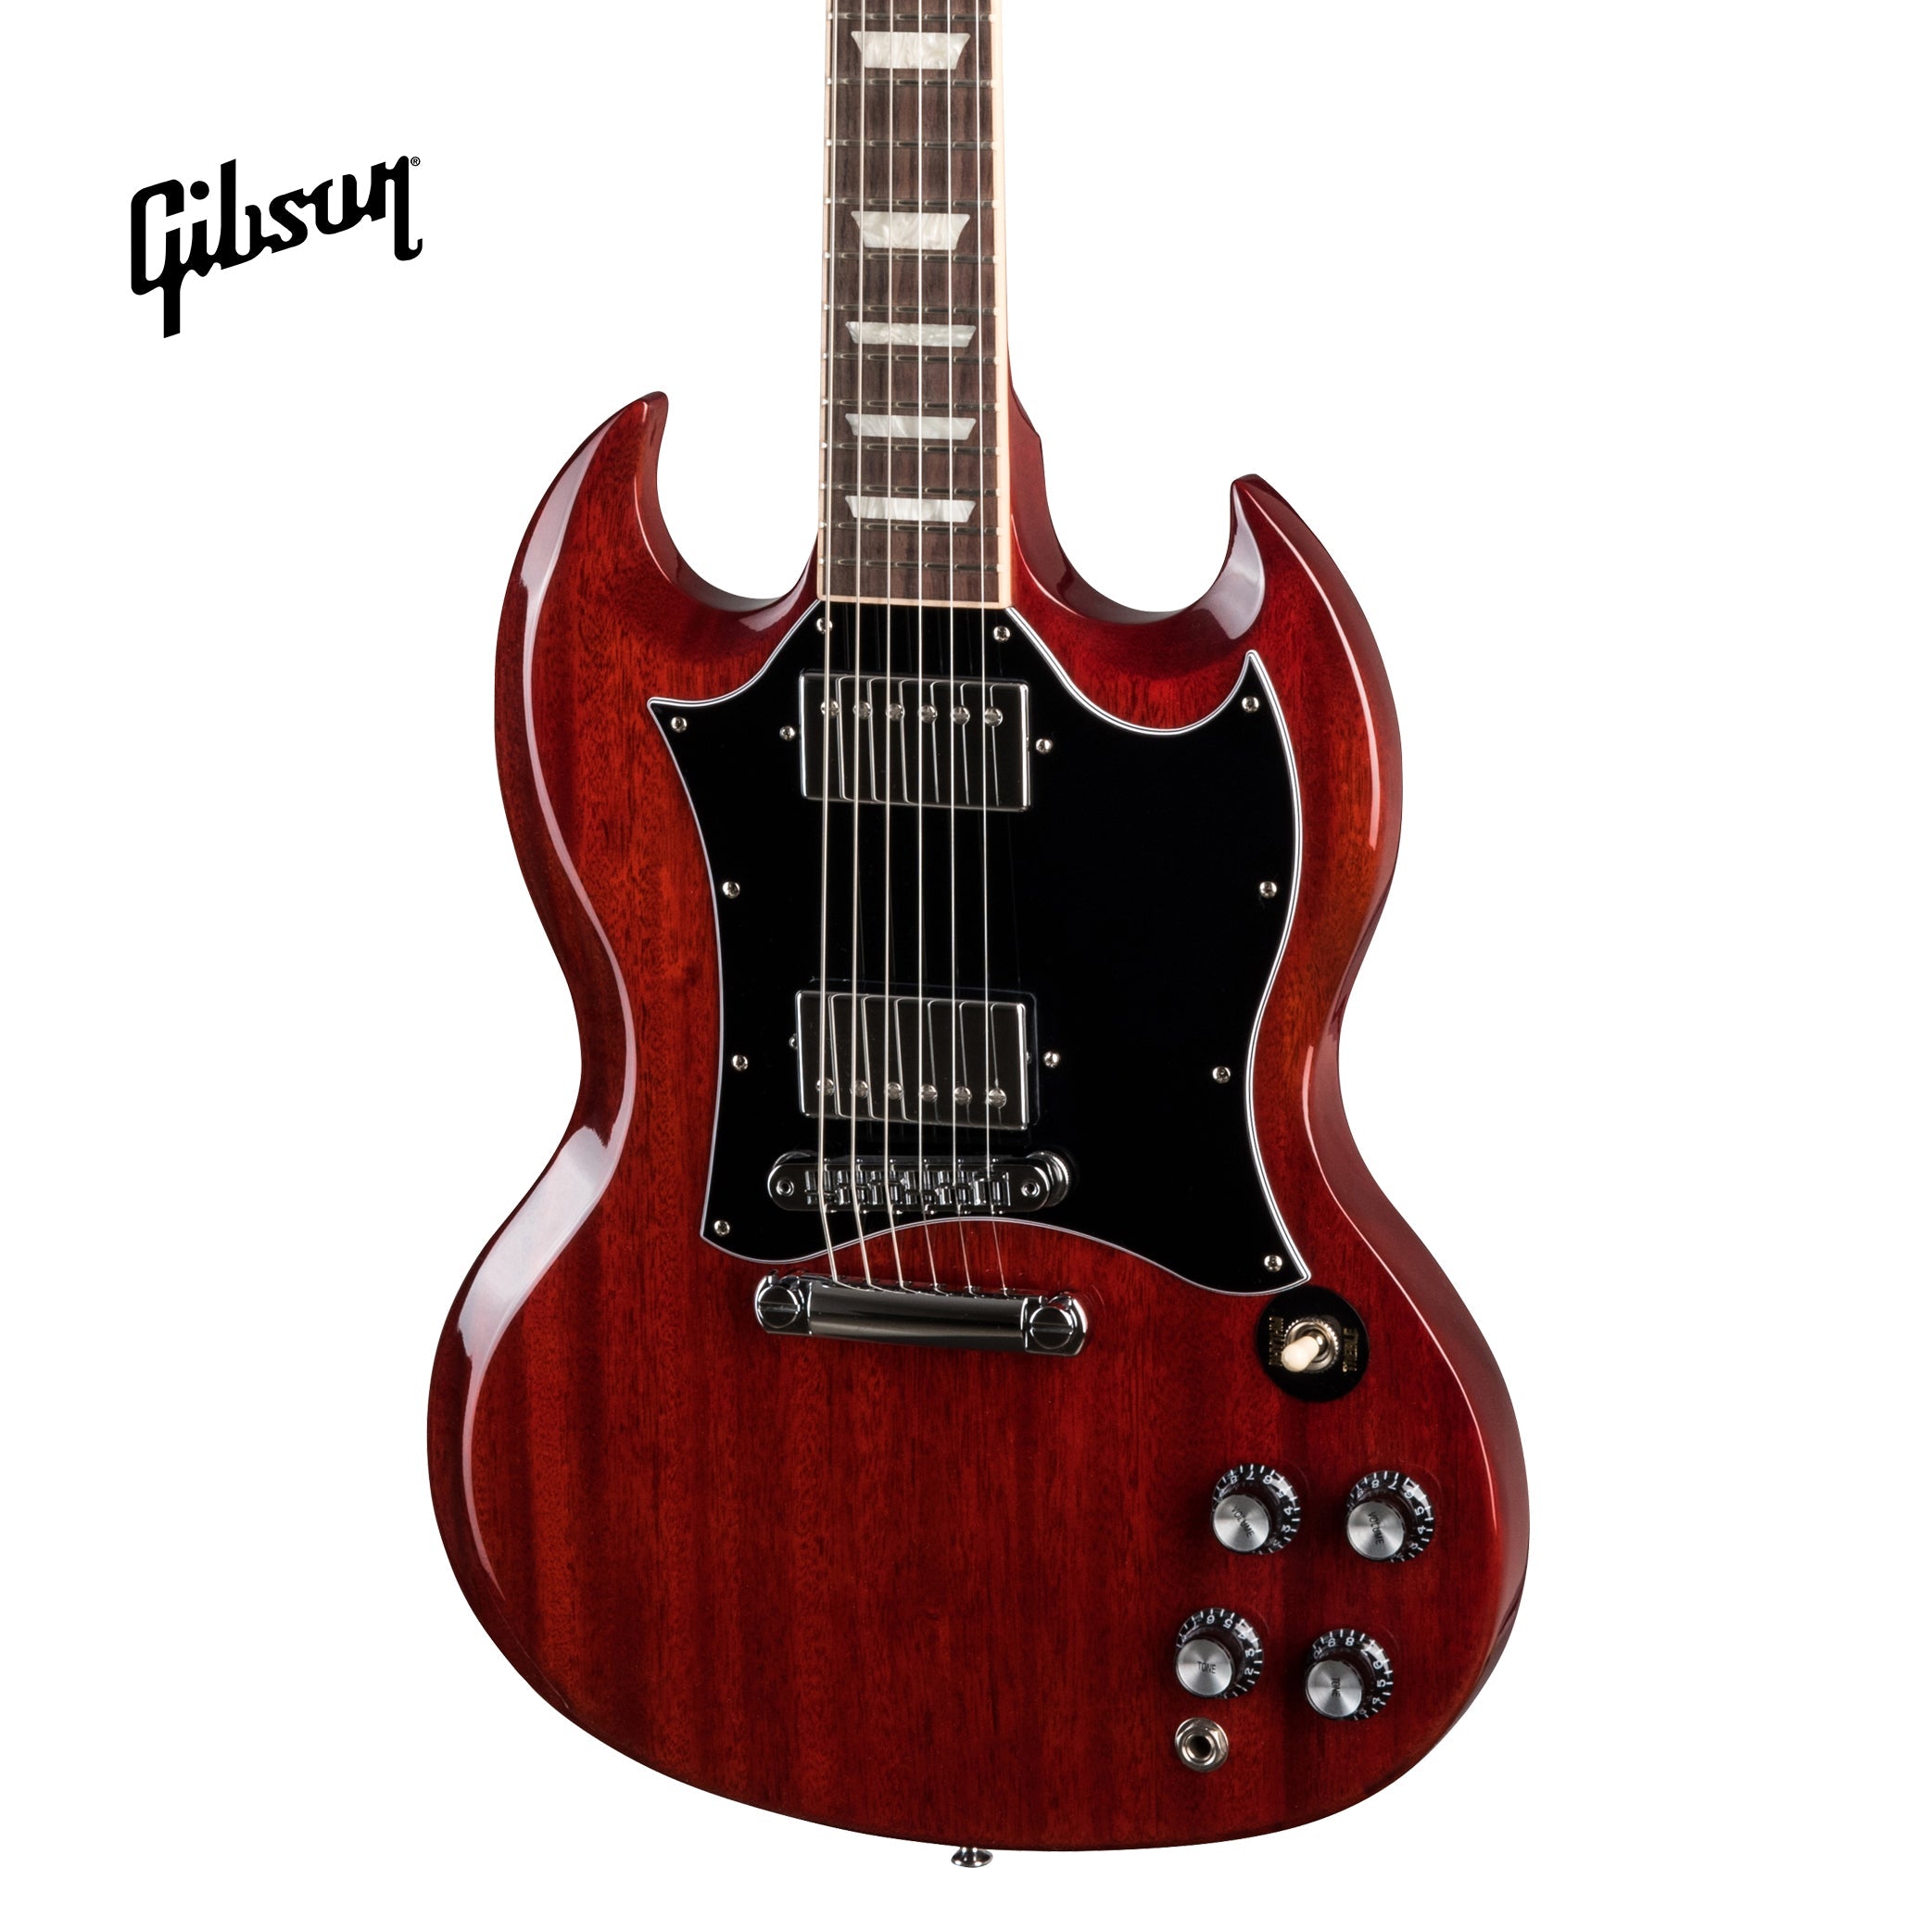 GIBSON SG STANDARD ELECTRIC GUITAR - HERITAGE CHERRY